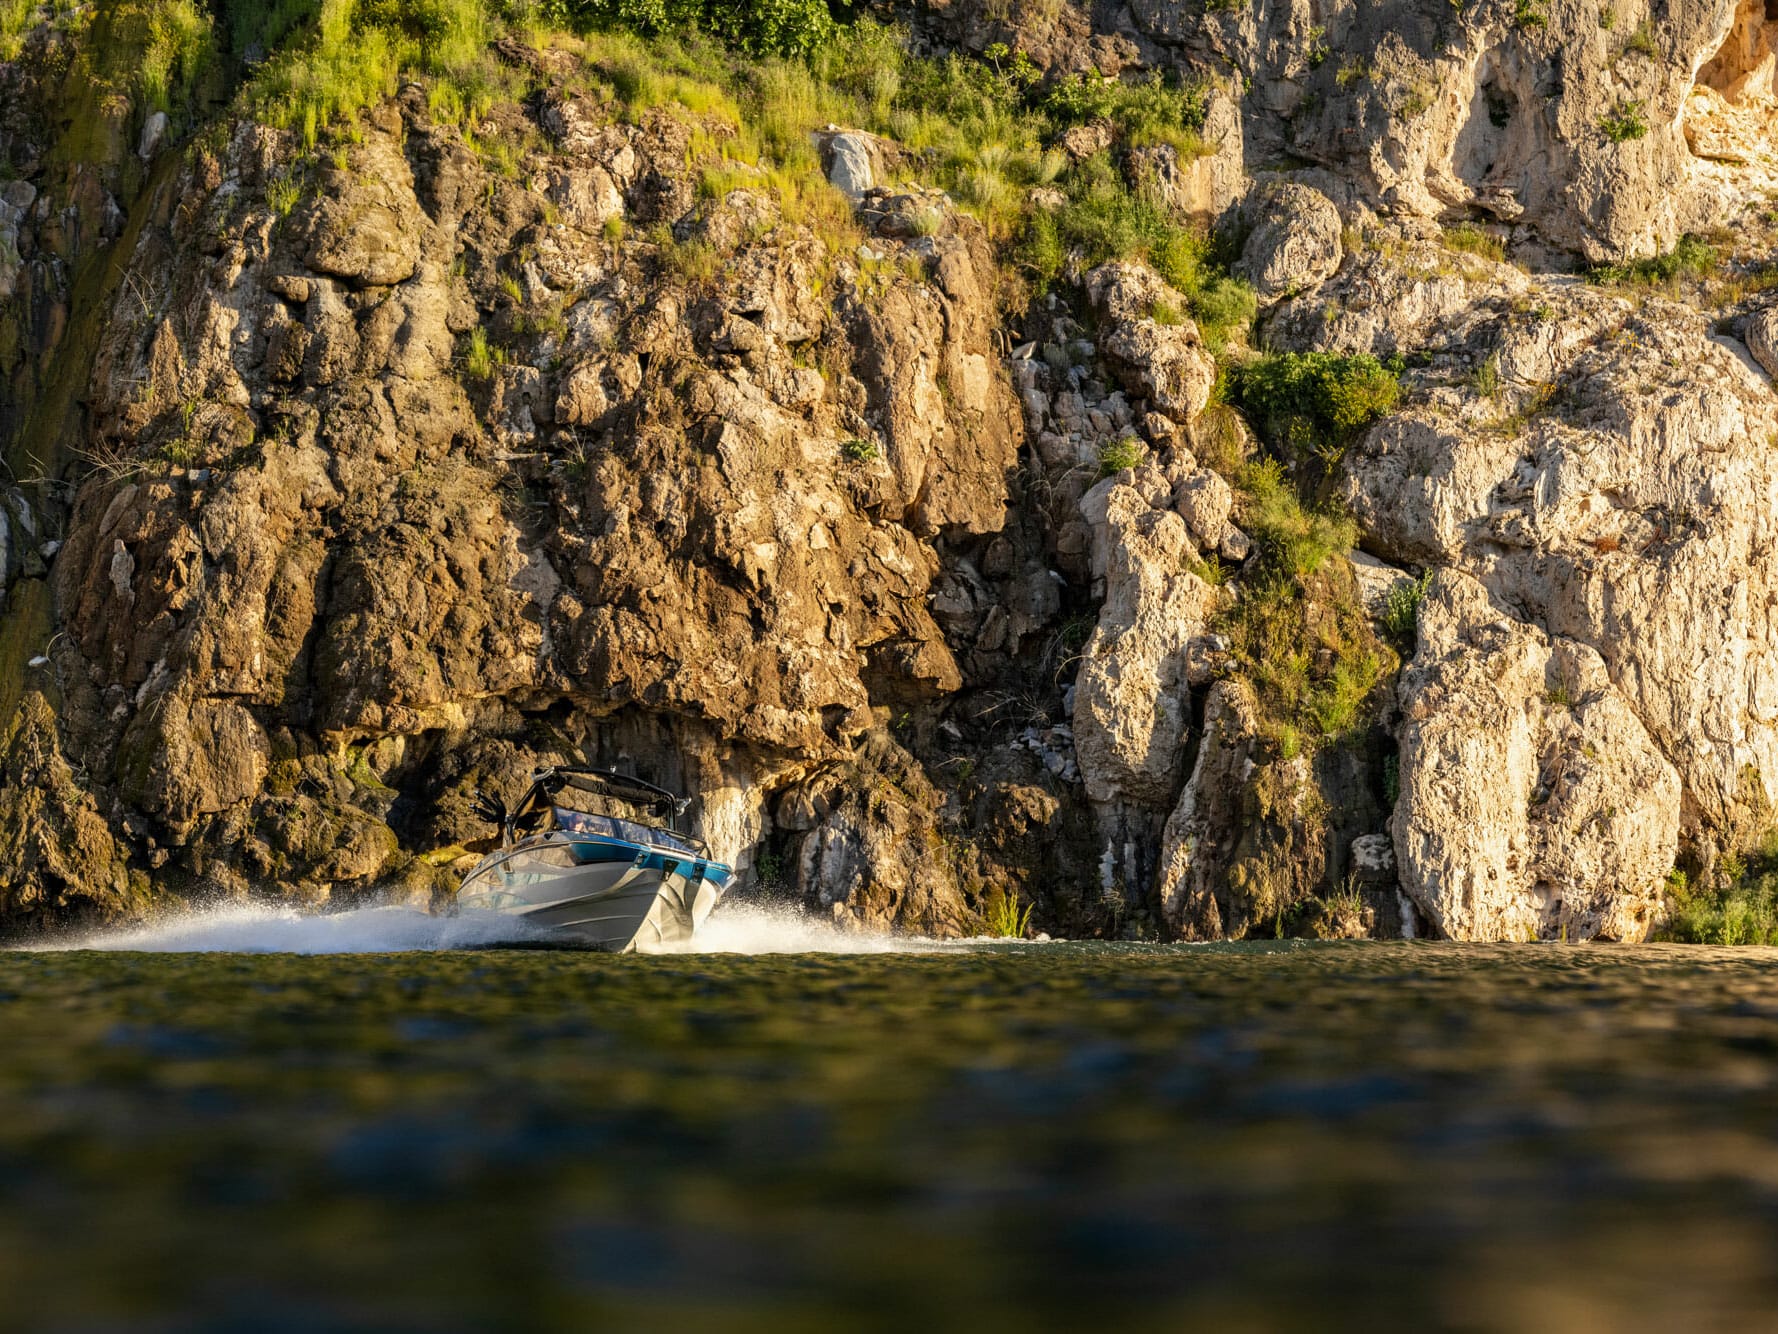 A wakeboat speeding near a cliff.